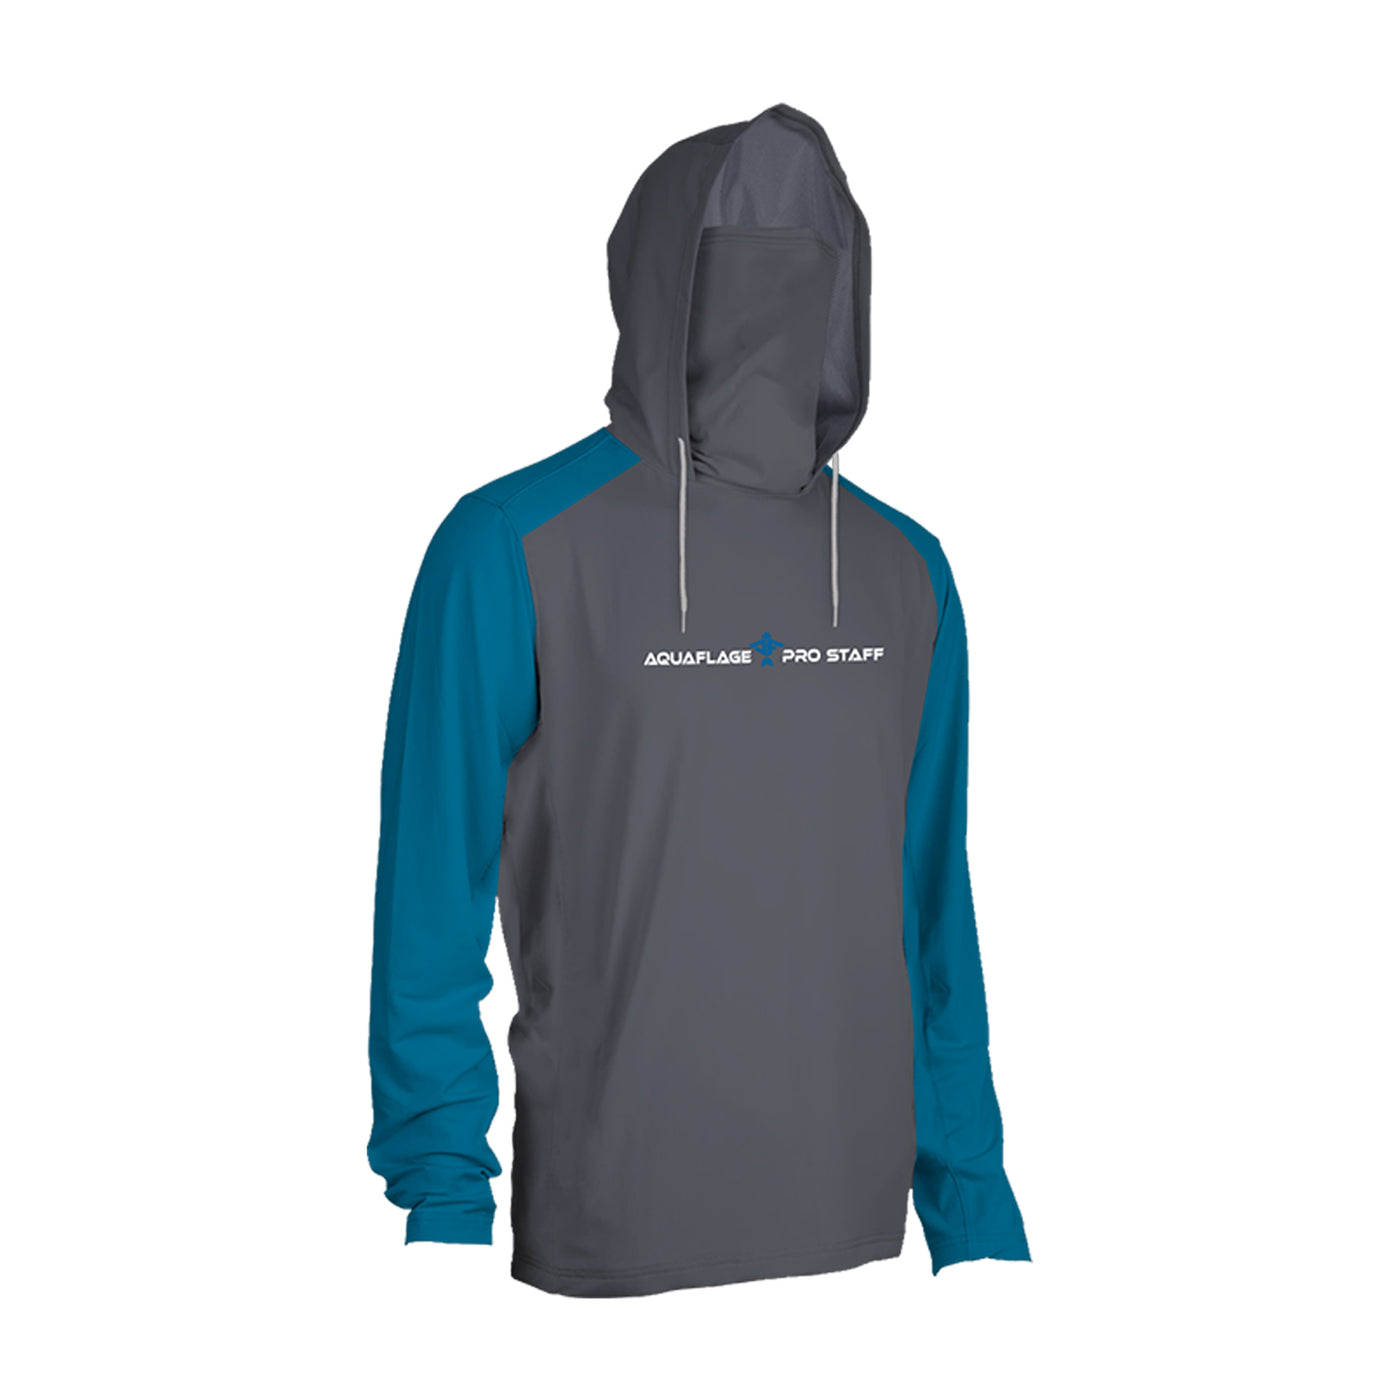 Rubicon Shield Pro Staff Team Grey/Blue Performance Hoodie With Mask - Men's